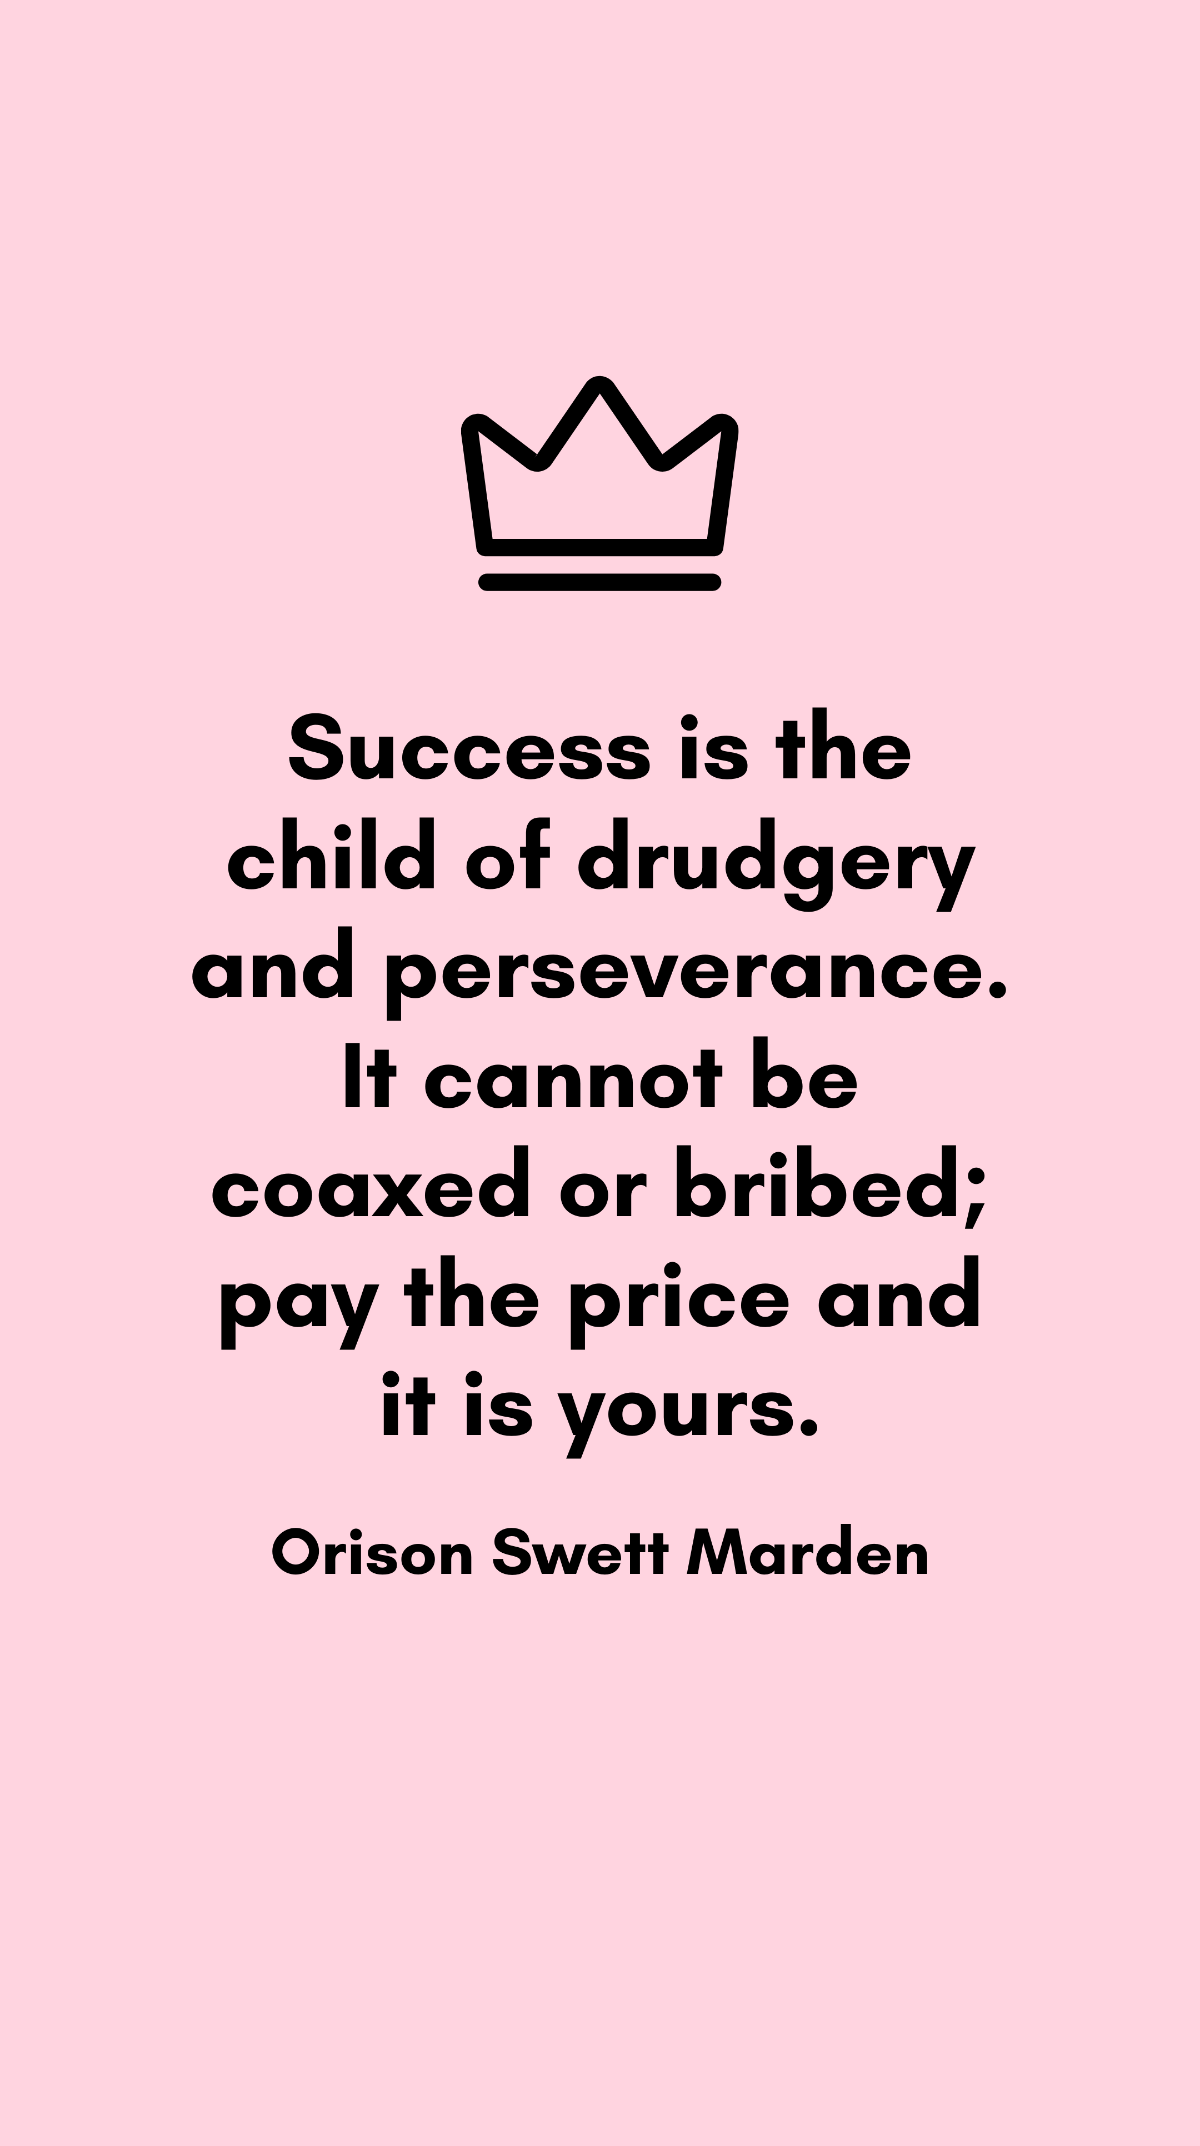 Orison Swett Marden - Success is the child of drudgery and perseverance. It cannot be coaxed or bribed; pay the price and it is yours. Template